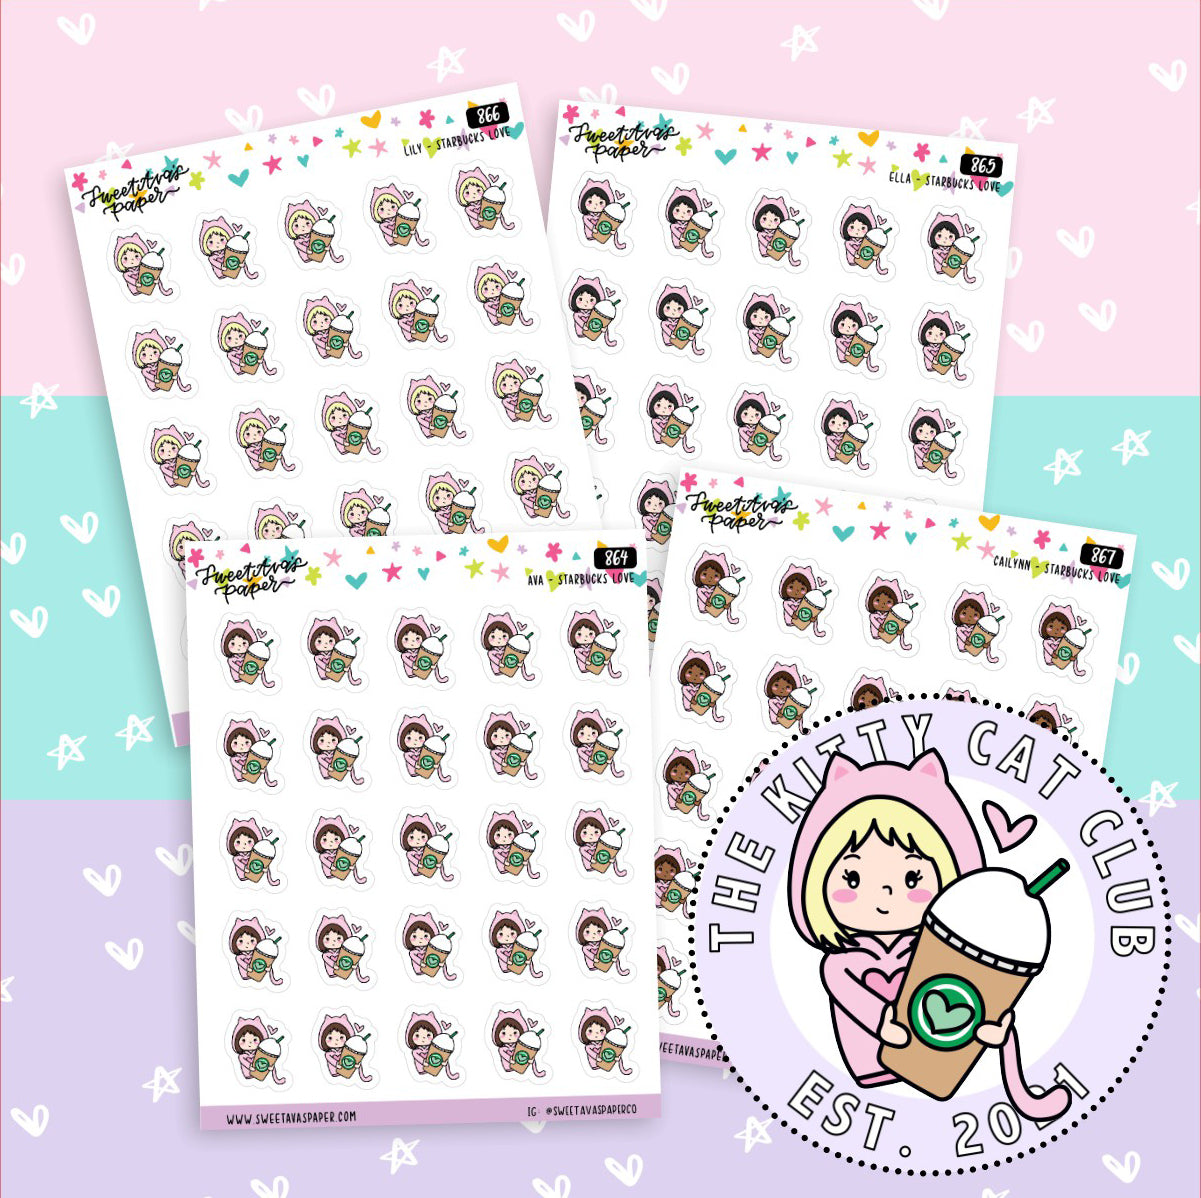 Green Iced Coffee Planner Stickers - The Kitty Cat Club